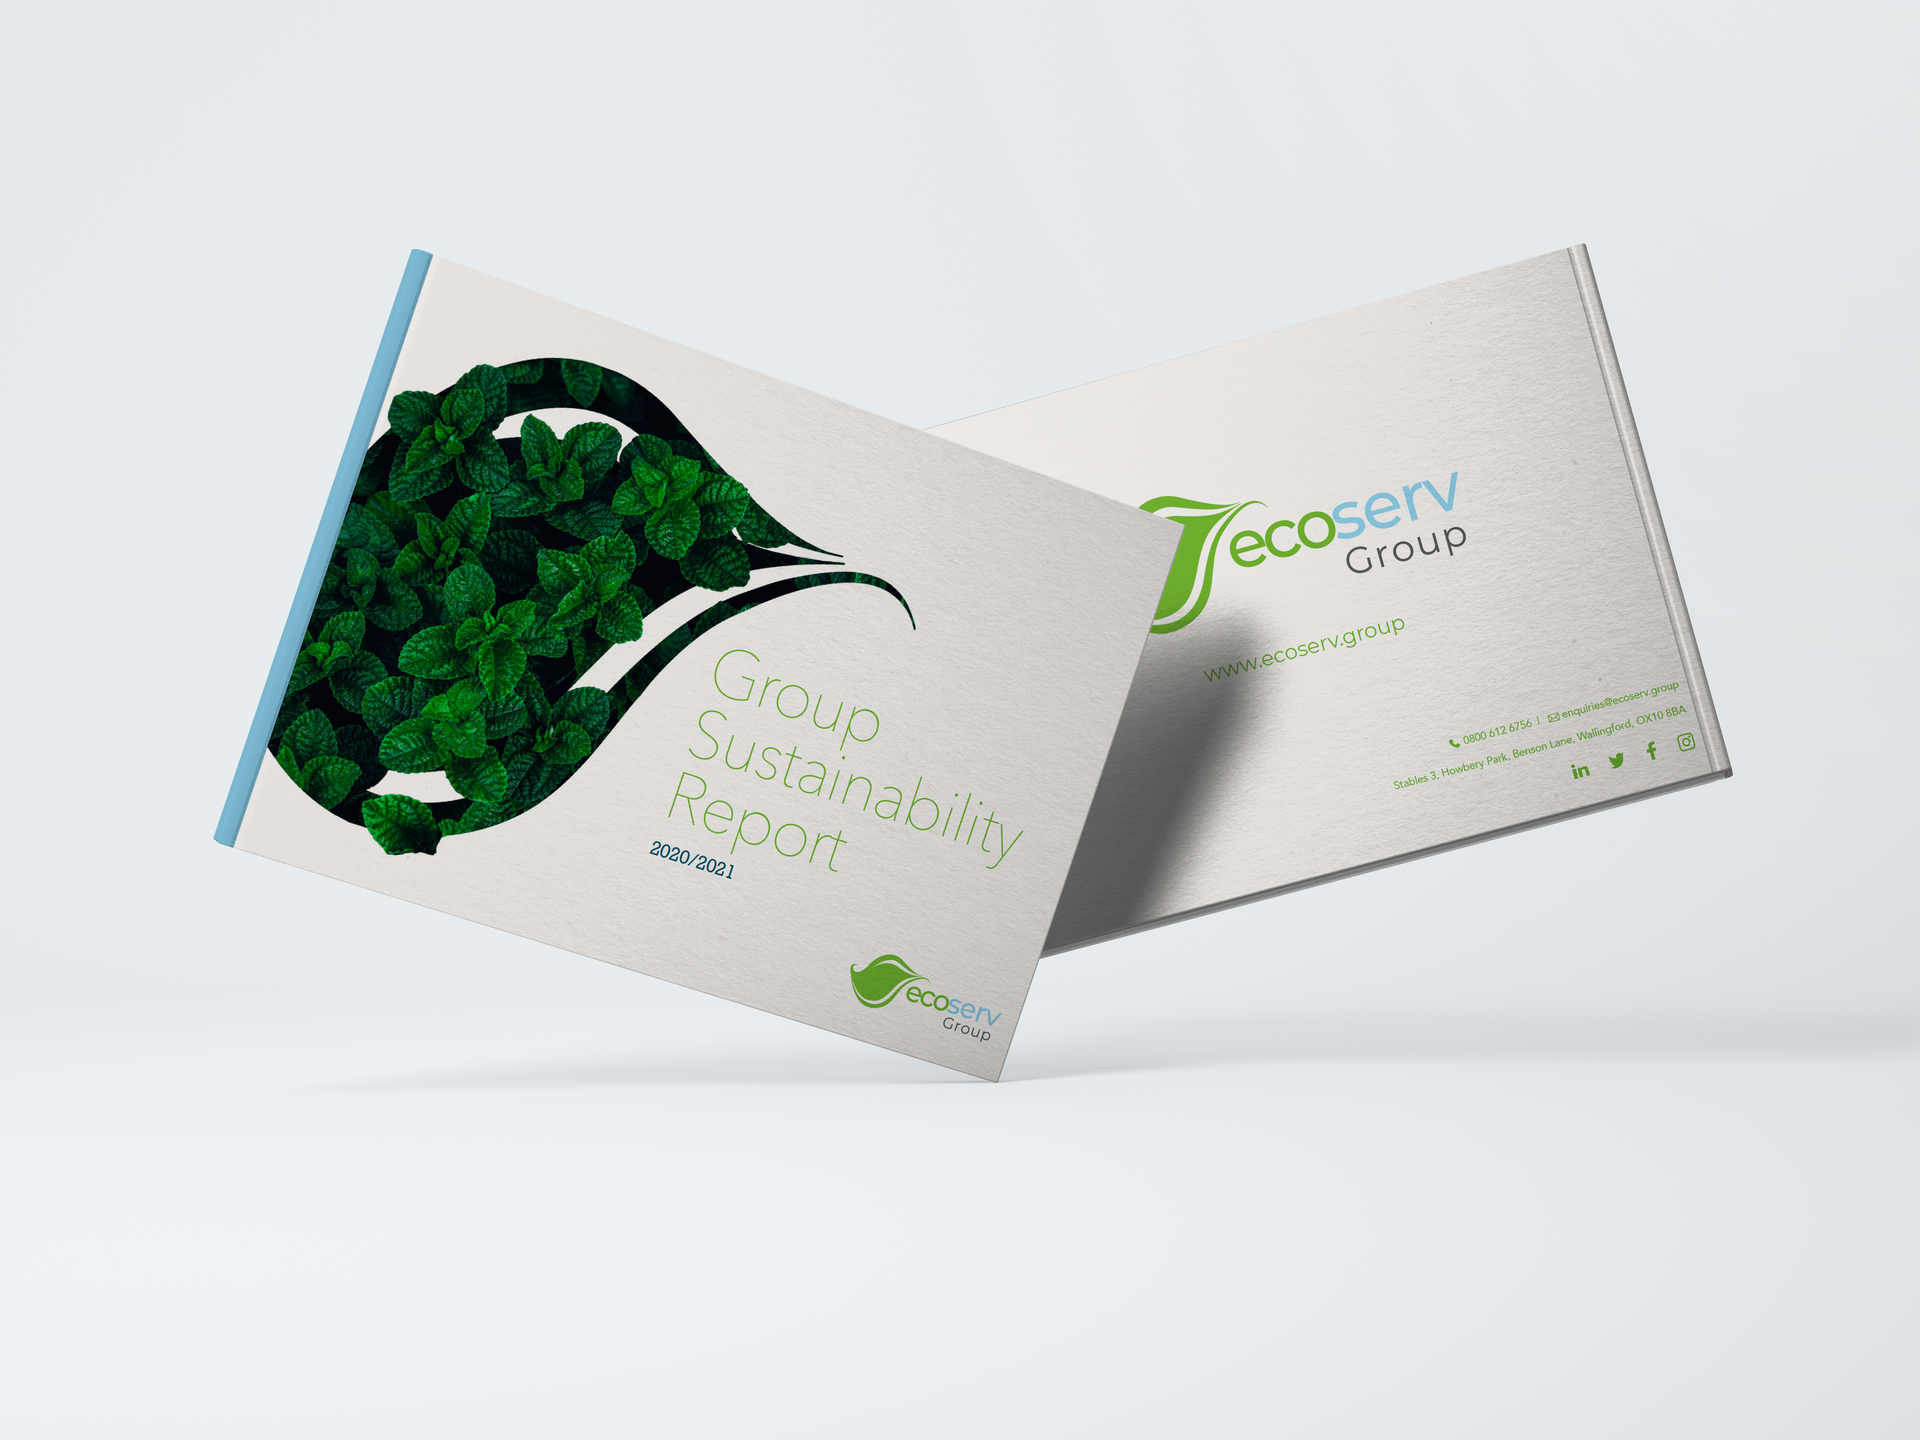 Image of two business cards with the above and beyond logo and some contour designs running across them.